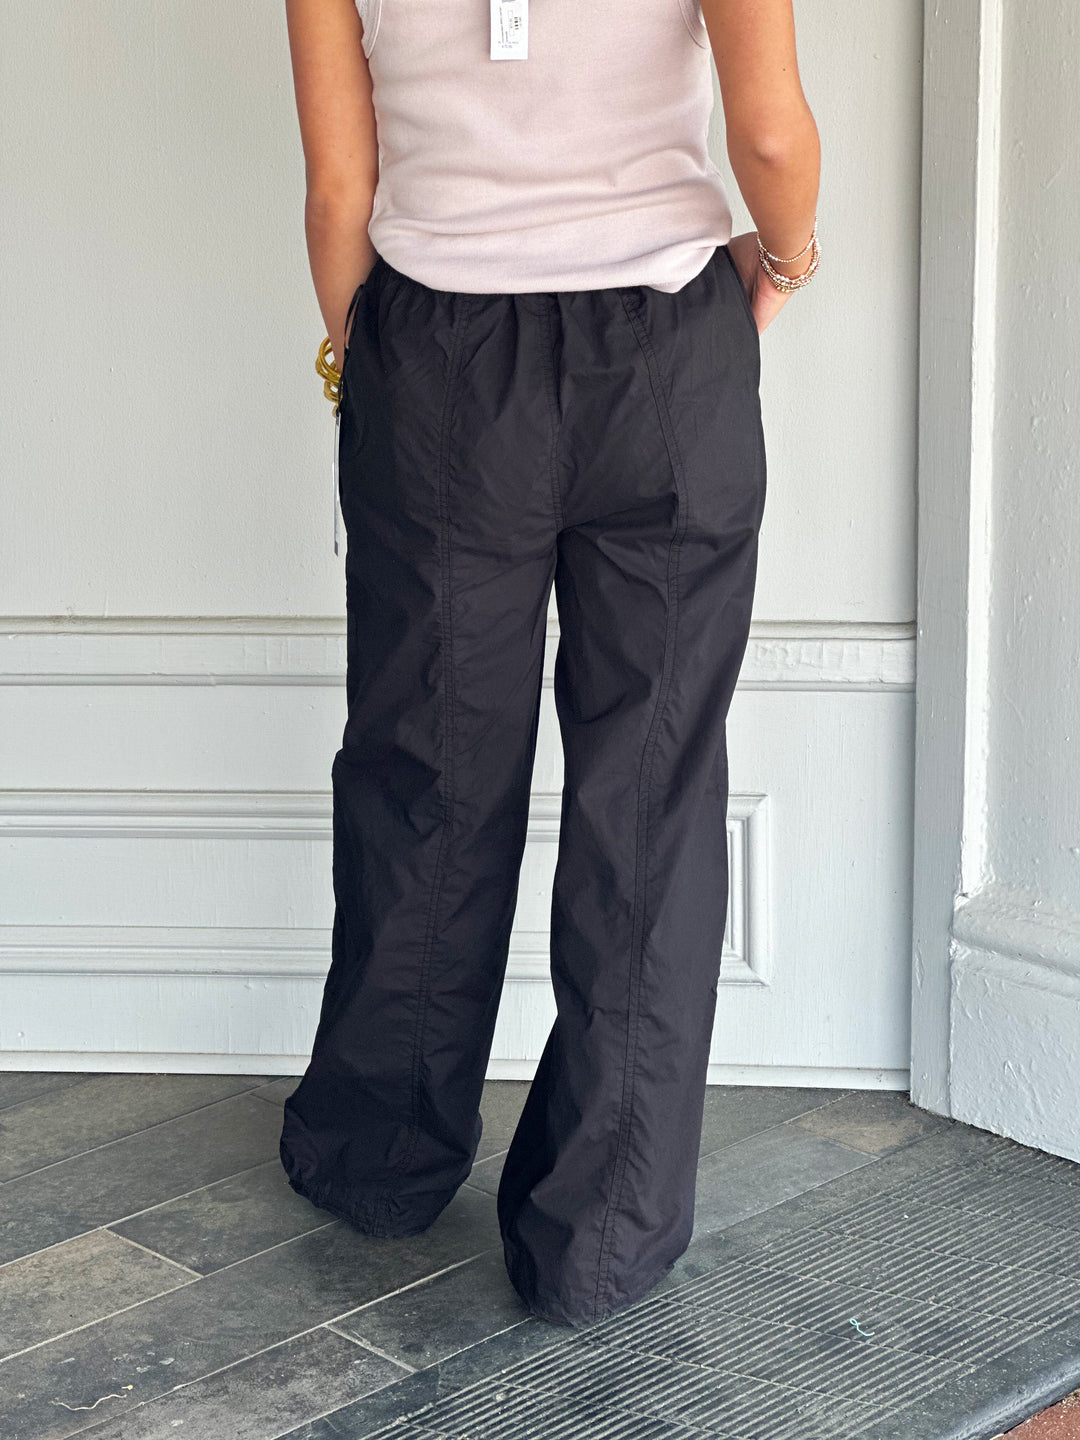 Charlie B Baggy Pull On Pant in Black